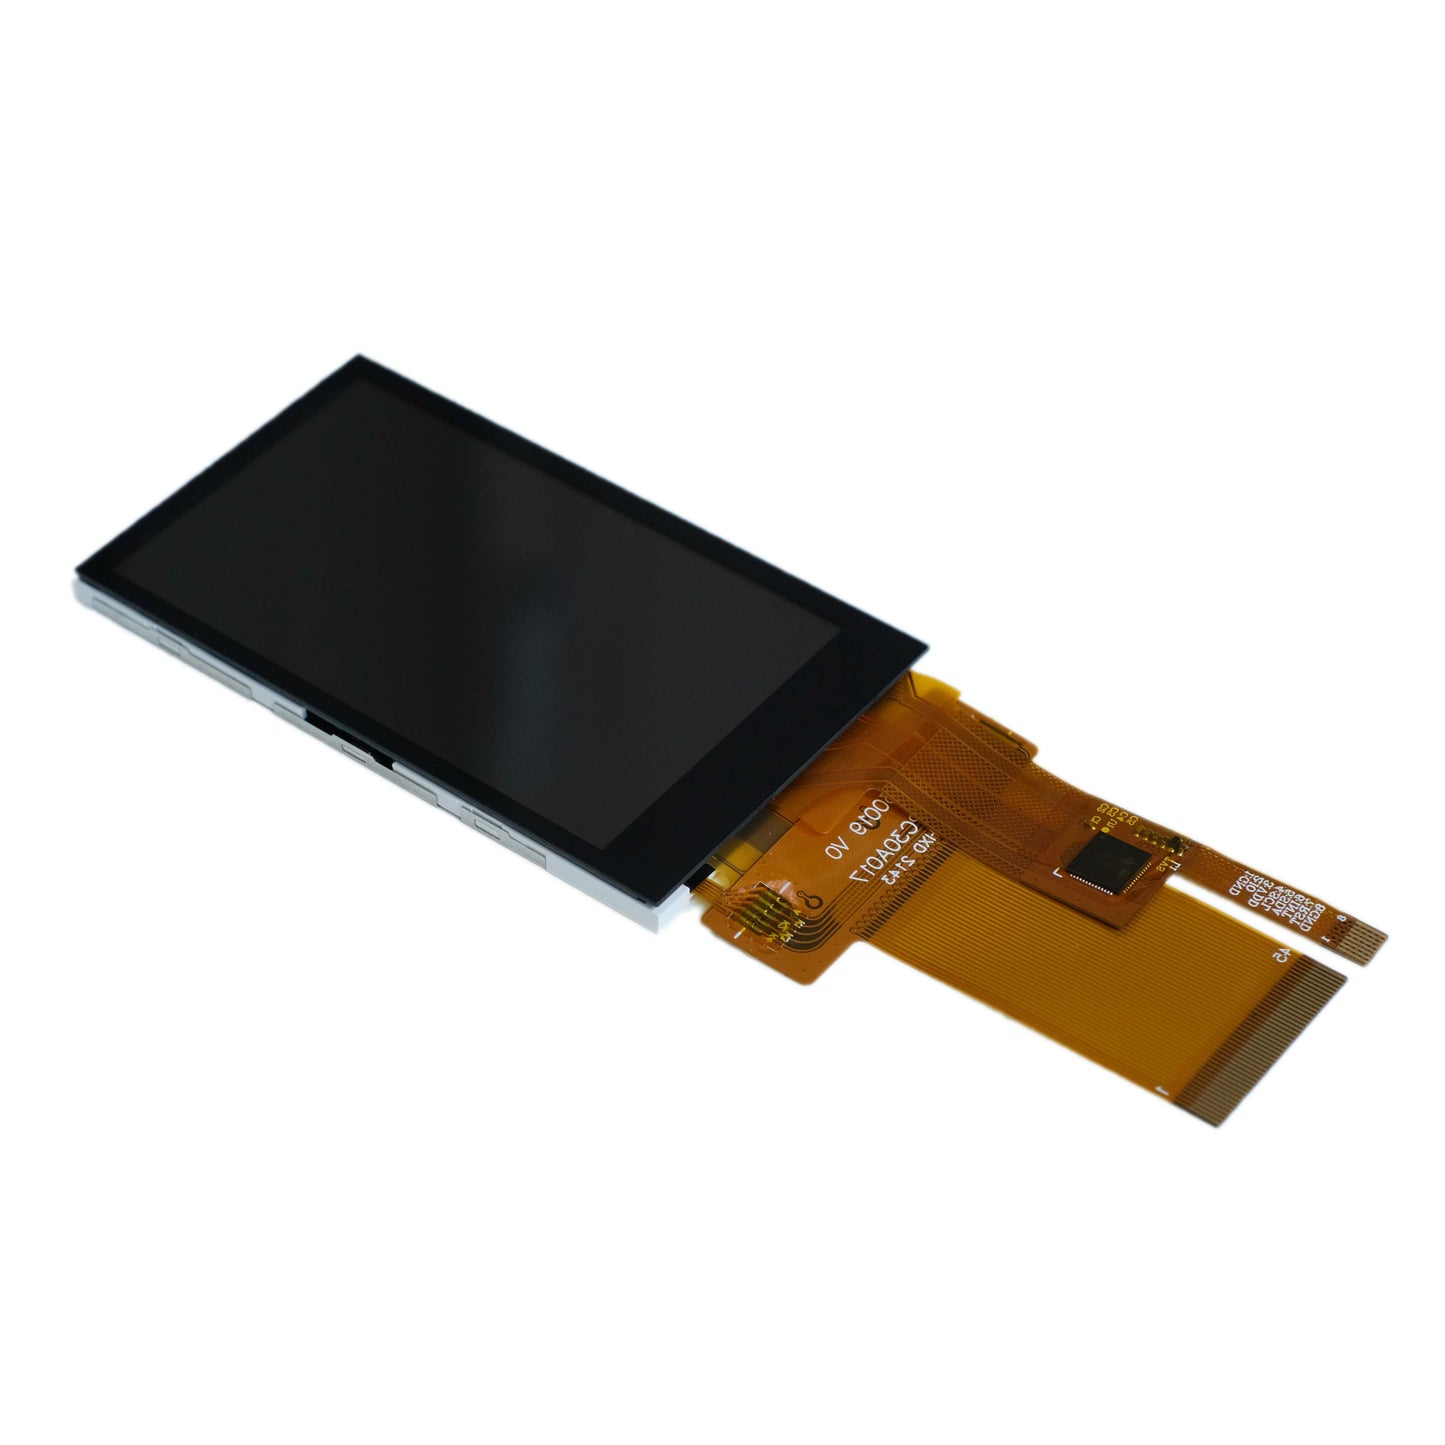 3.0-inch 240x400 IPS display module with capacitive touch and SPI, MCU, RGB interfaces